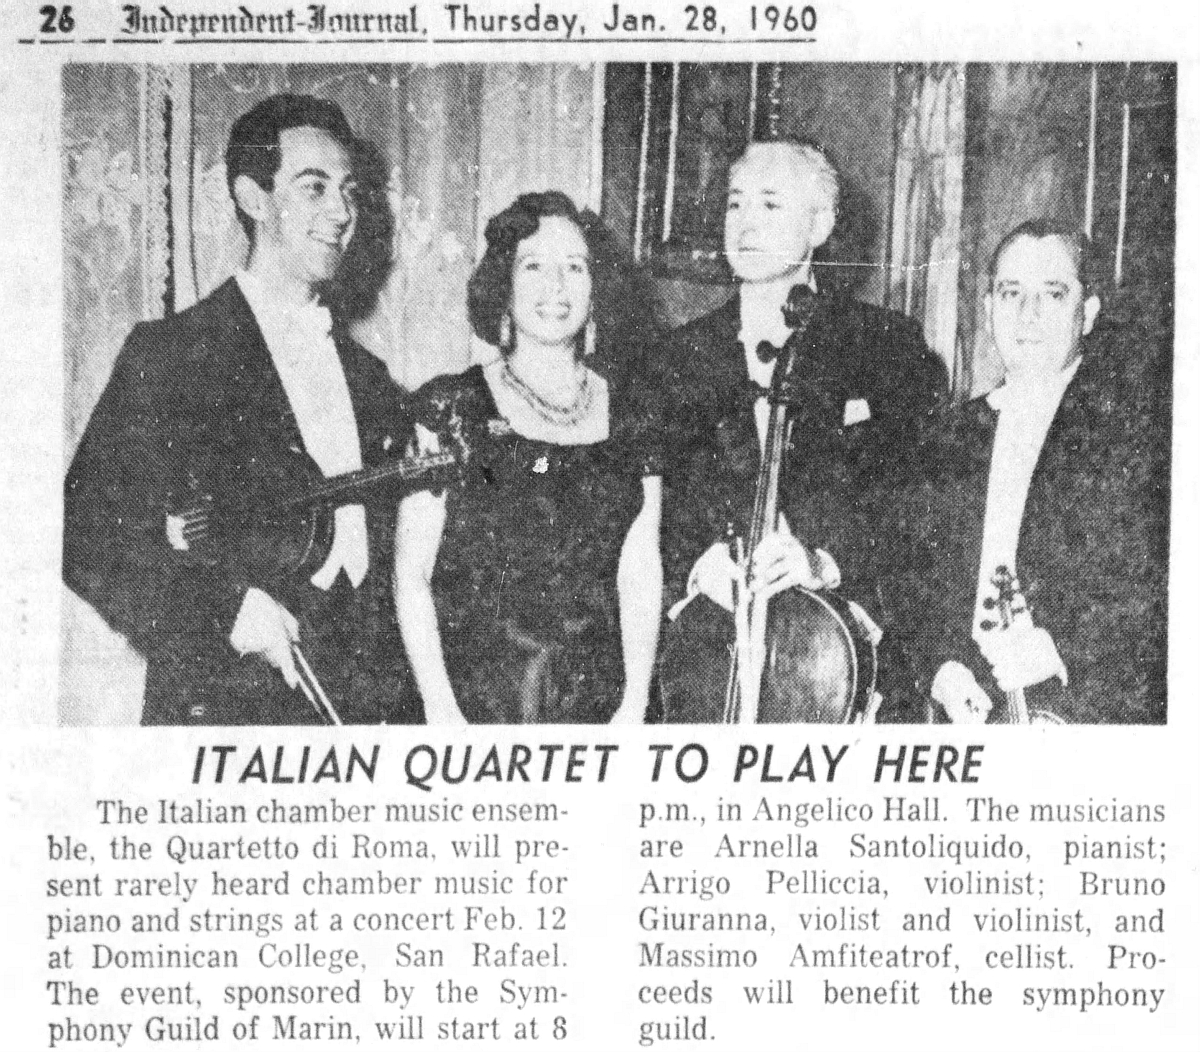 Quartetto di Roma Daily Independent Journal Thu Jan 28 1960 page 26